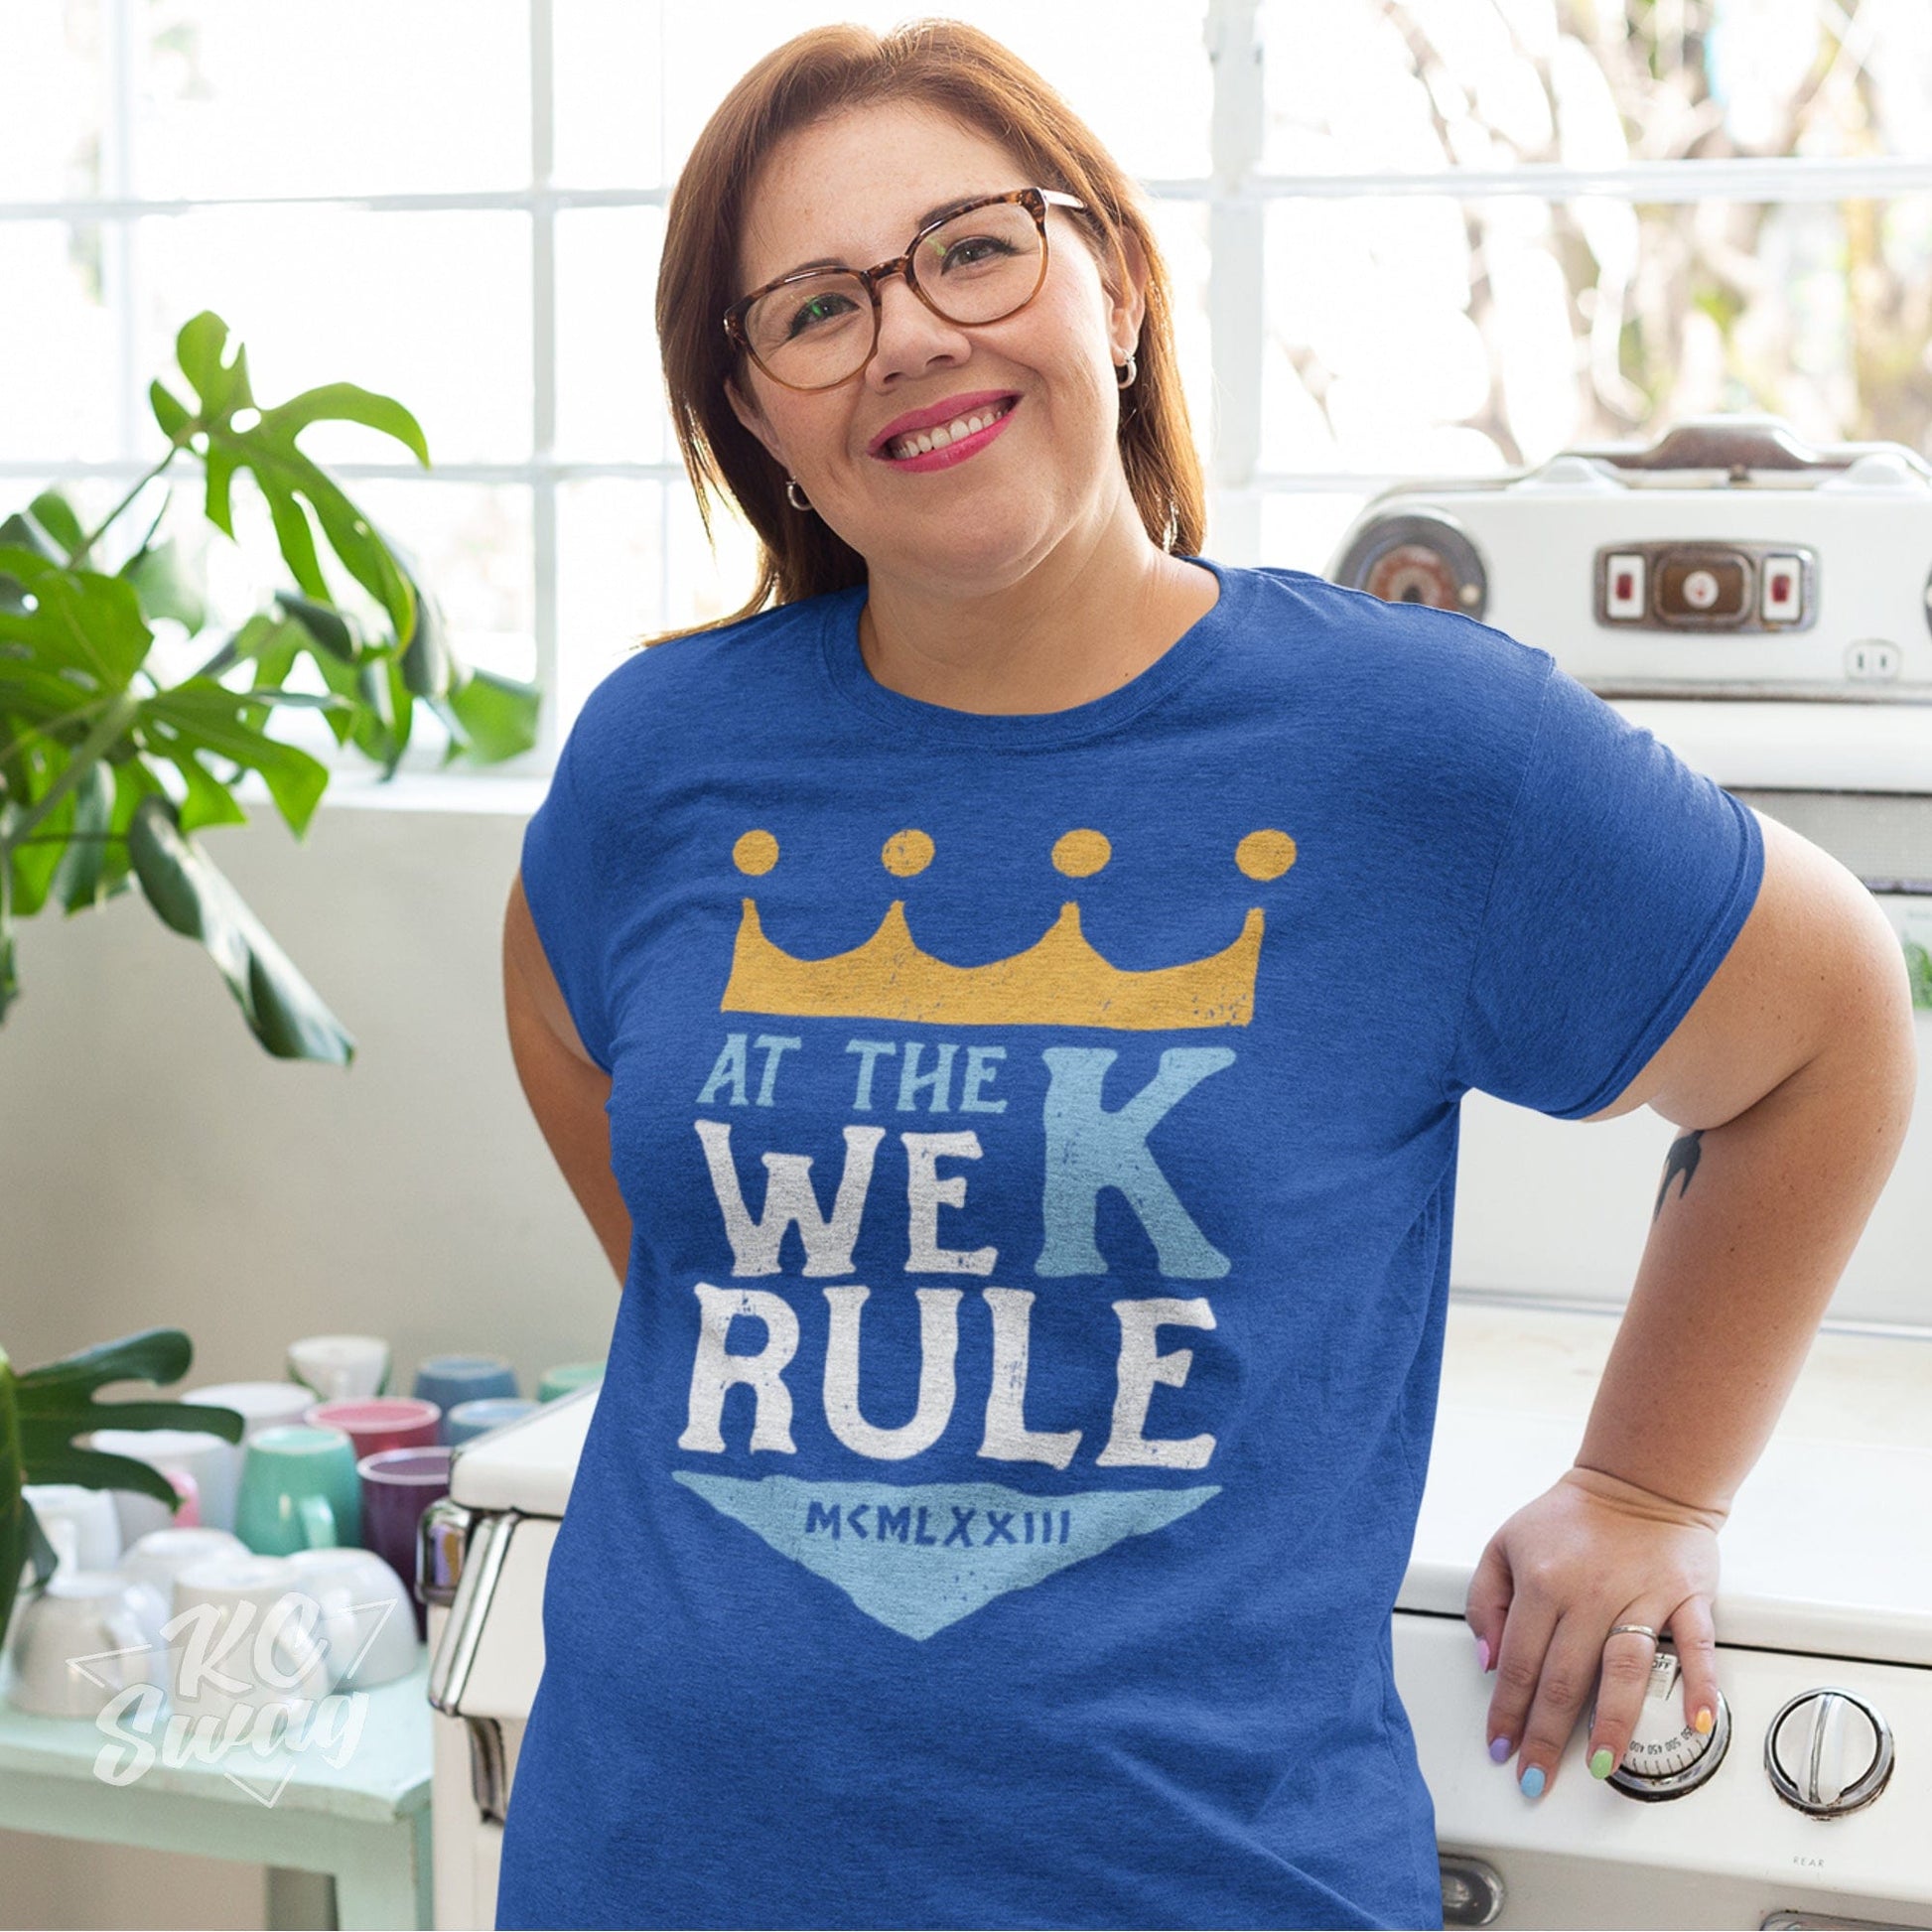 KC Swag Kansas City Royals AT THE K WE RULE on heather royal blue unisex t-shirt worn by female model leaning on stove in bright kitchen